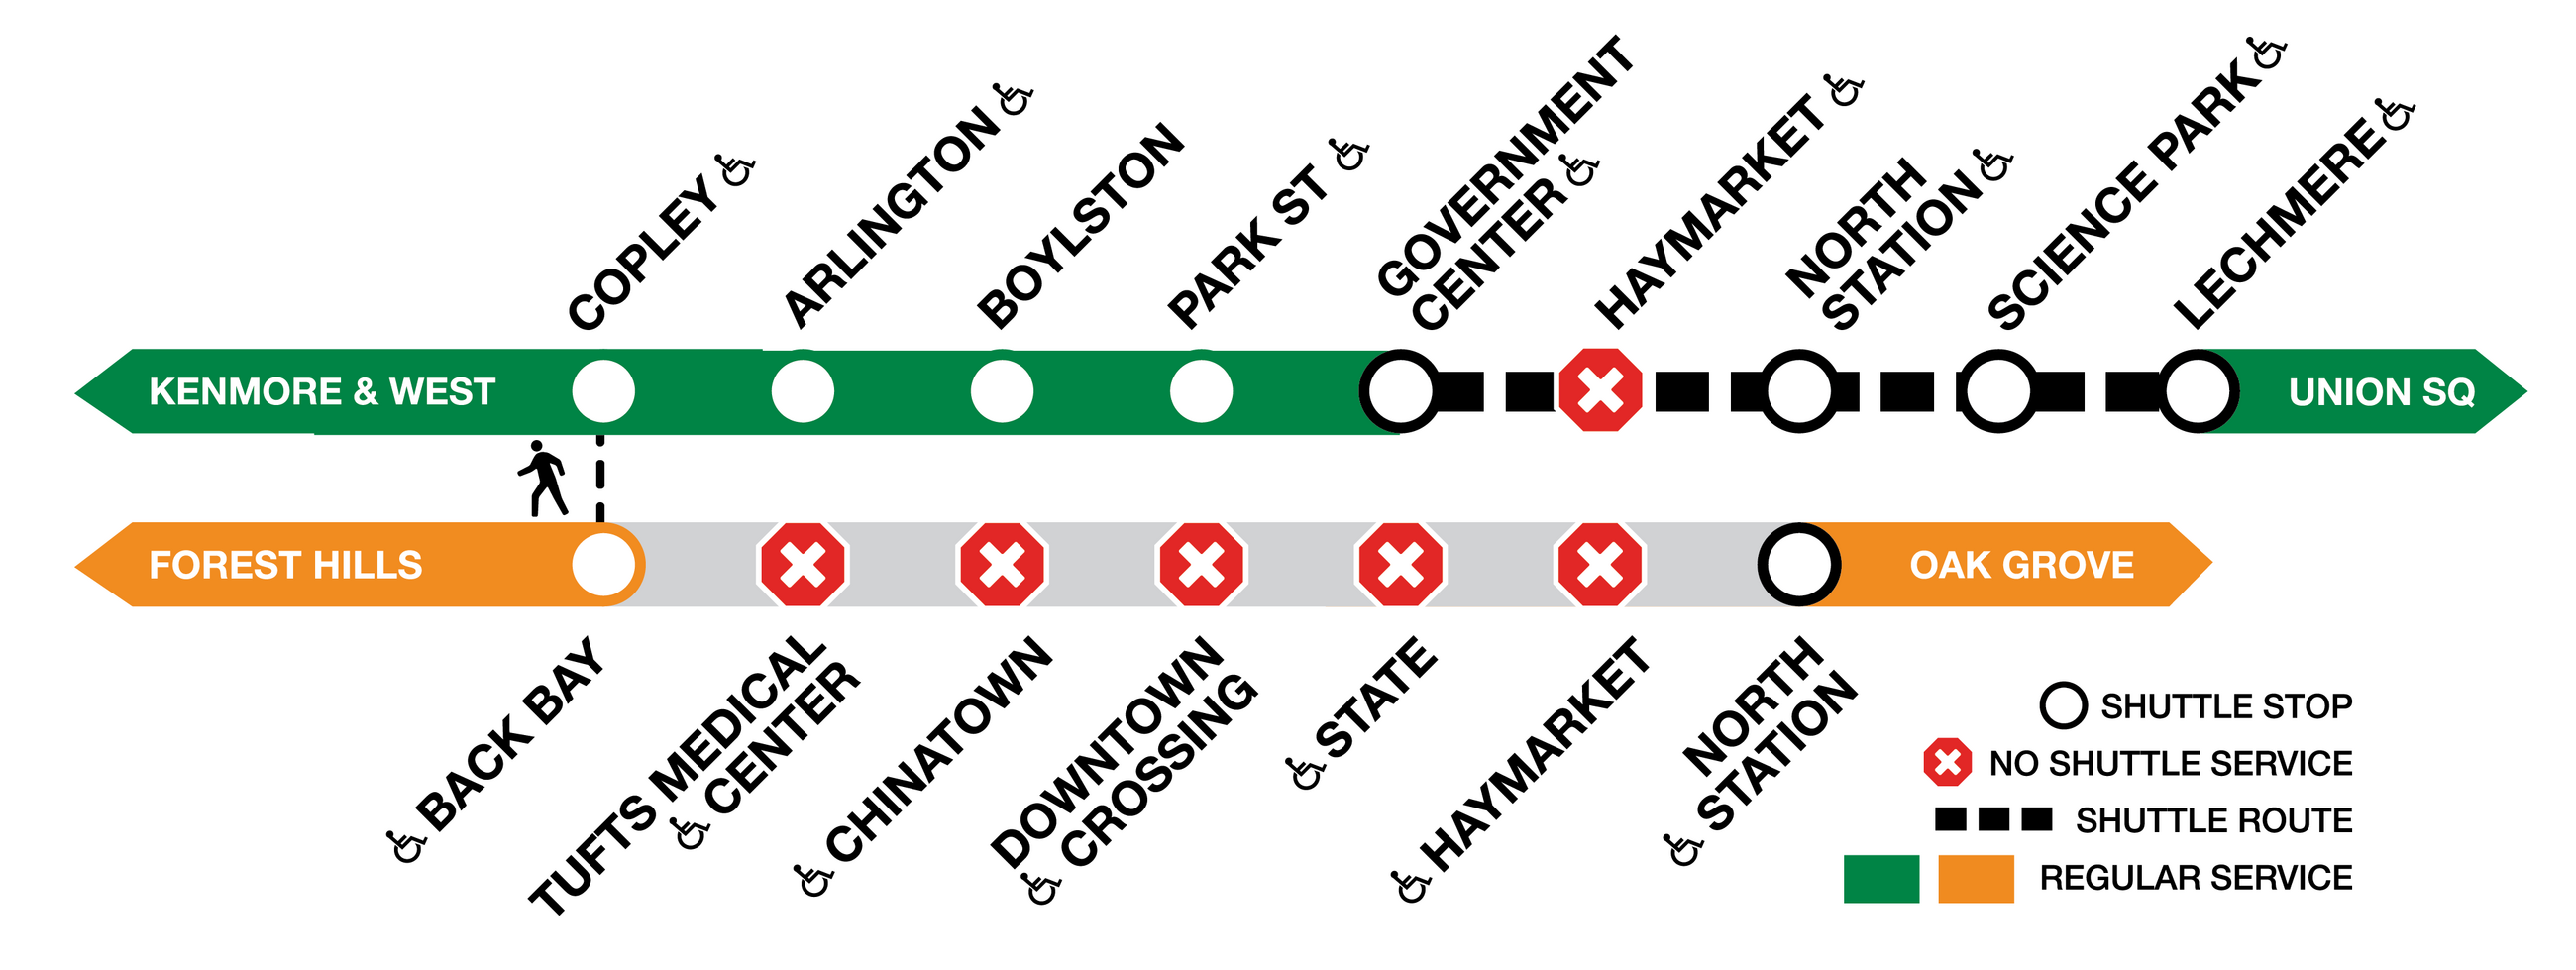 Diagram showing closed subway stations in downtown Boston